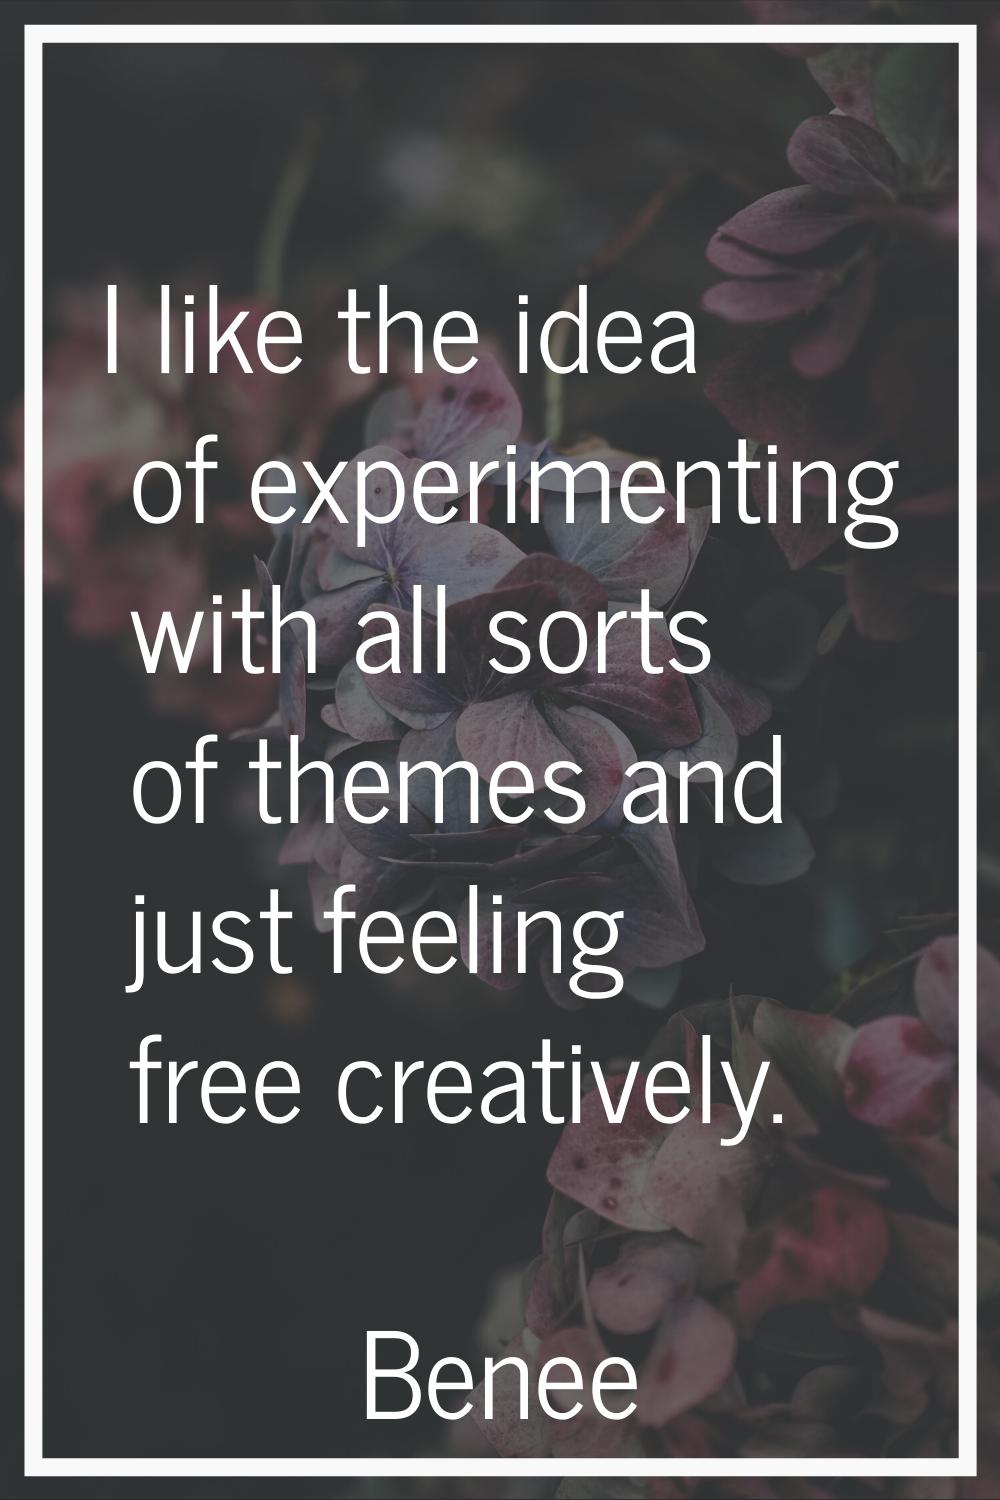 I like the idea of experimenting with all sorts of themes and just feeling free creatively.